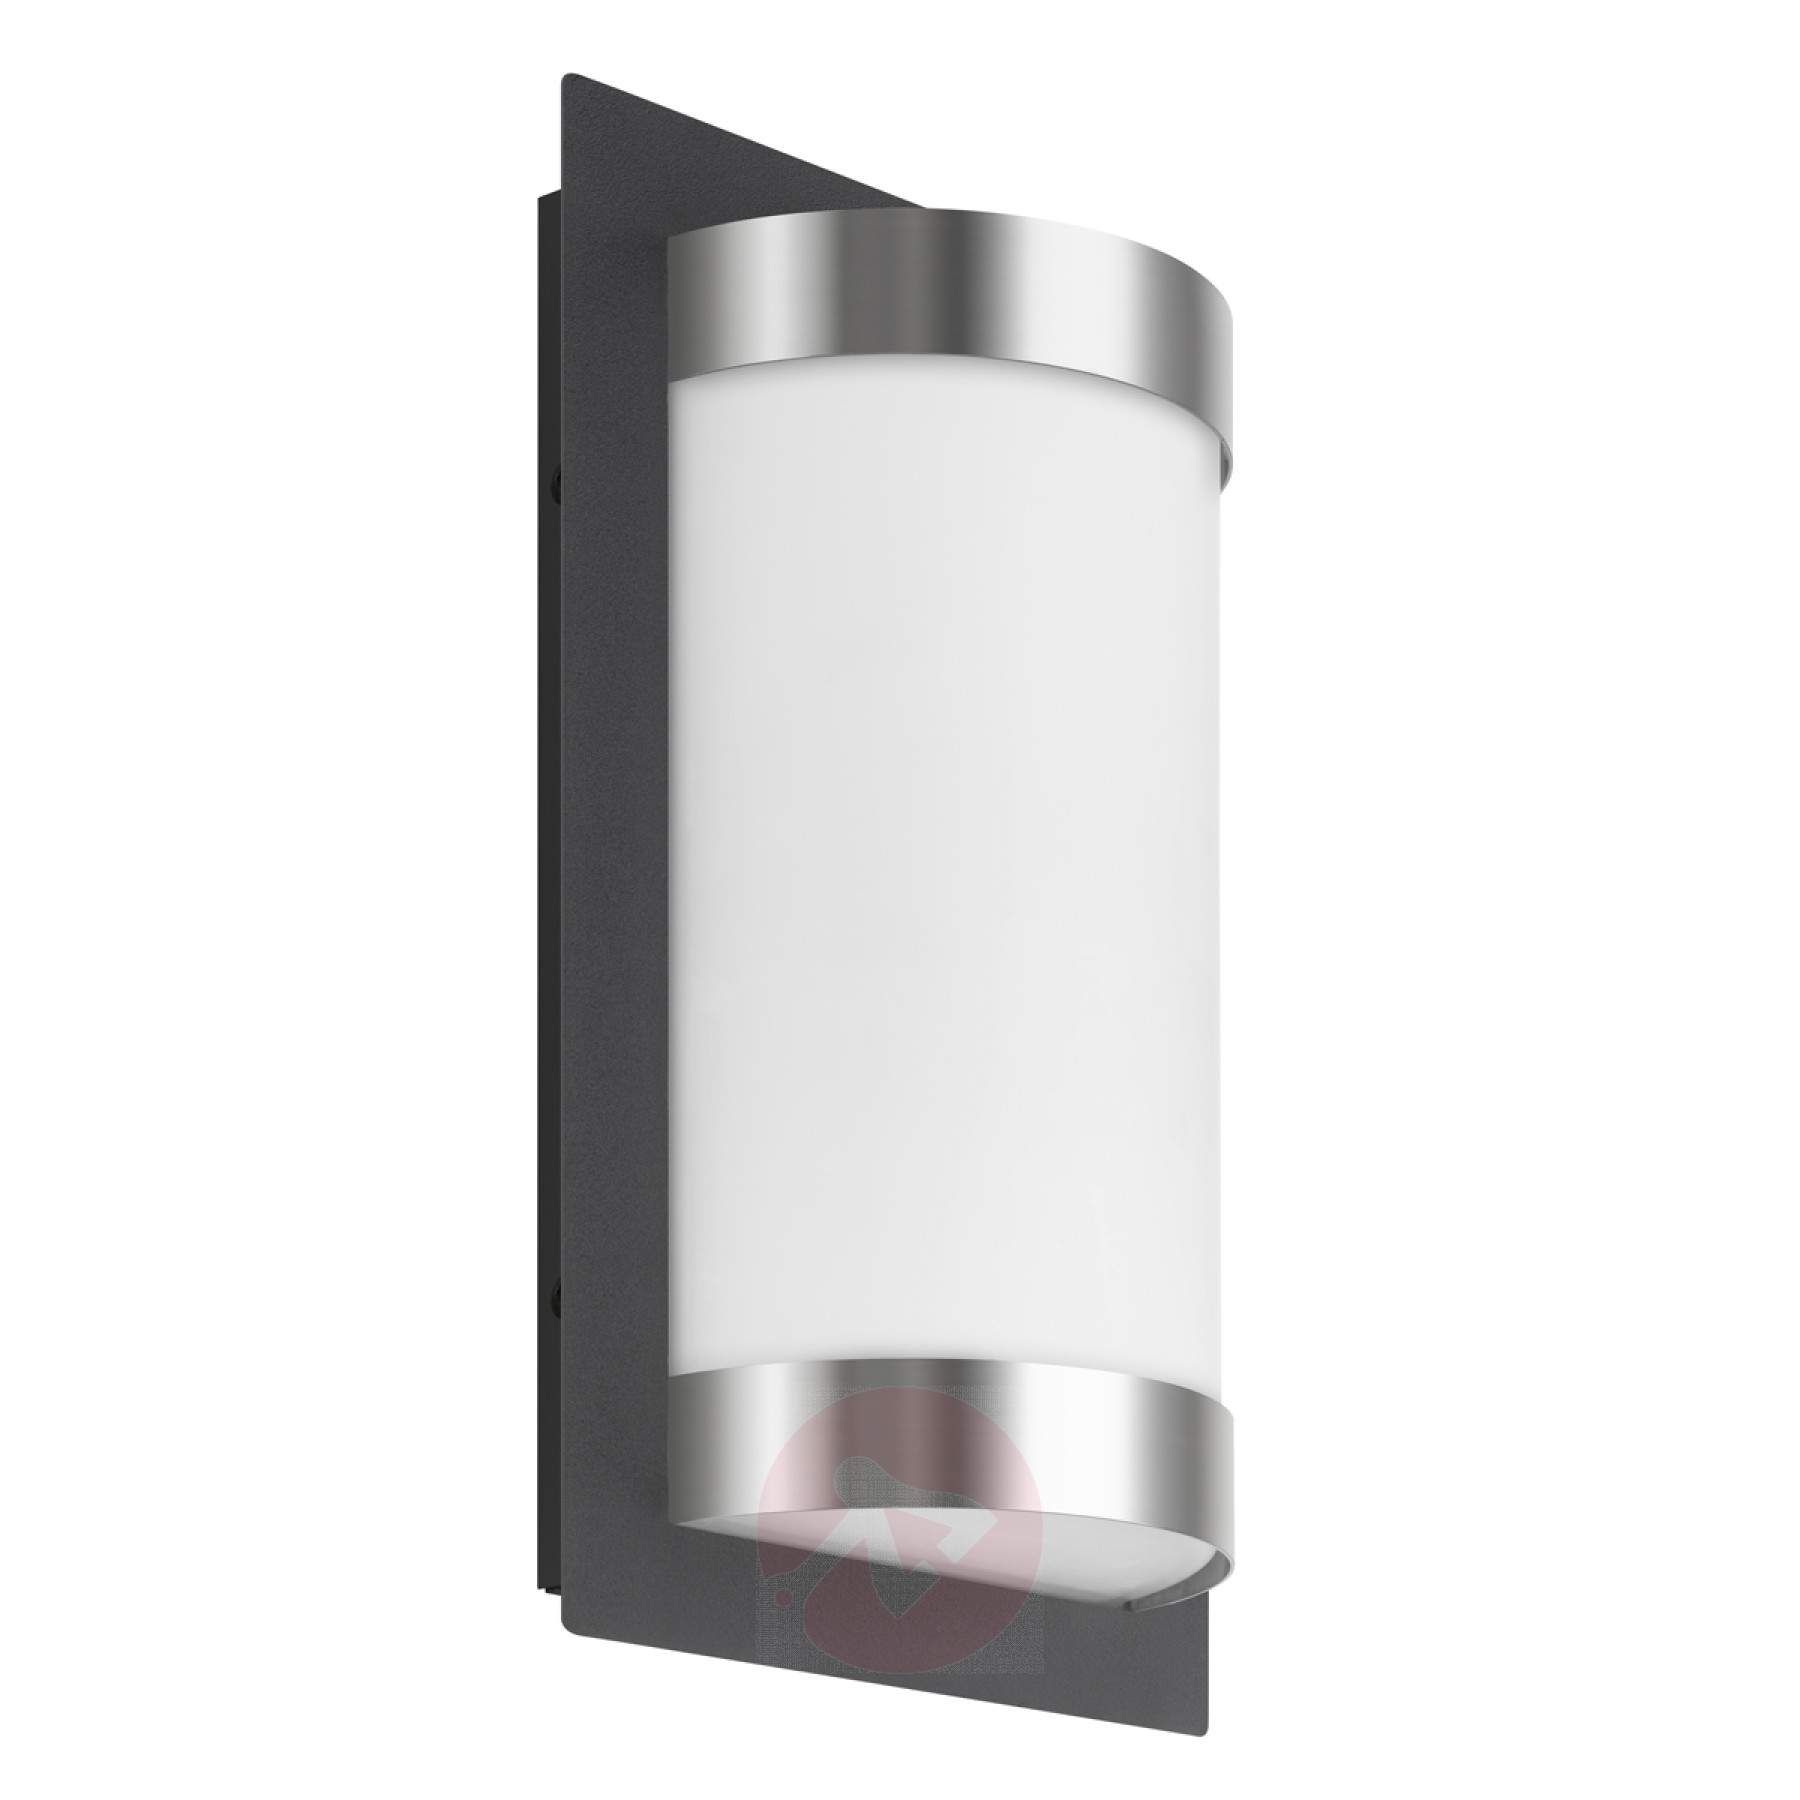 High Quality Apollo Outdoor Wall Light | Lights.ie In Quality Outdoor Wall Lighting (Photo 8 of 15)